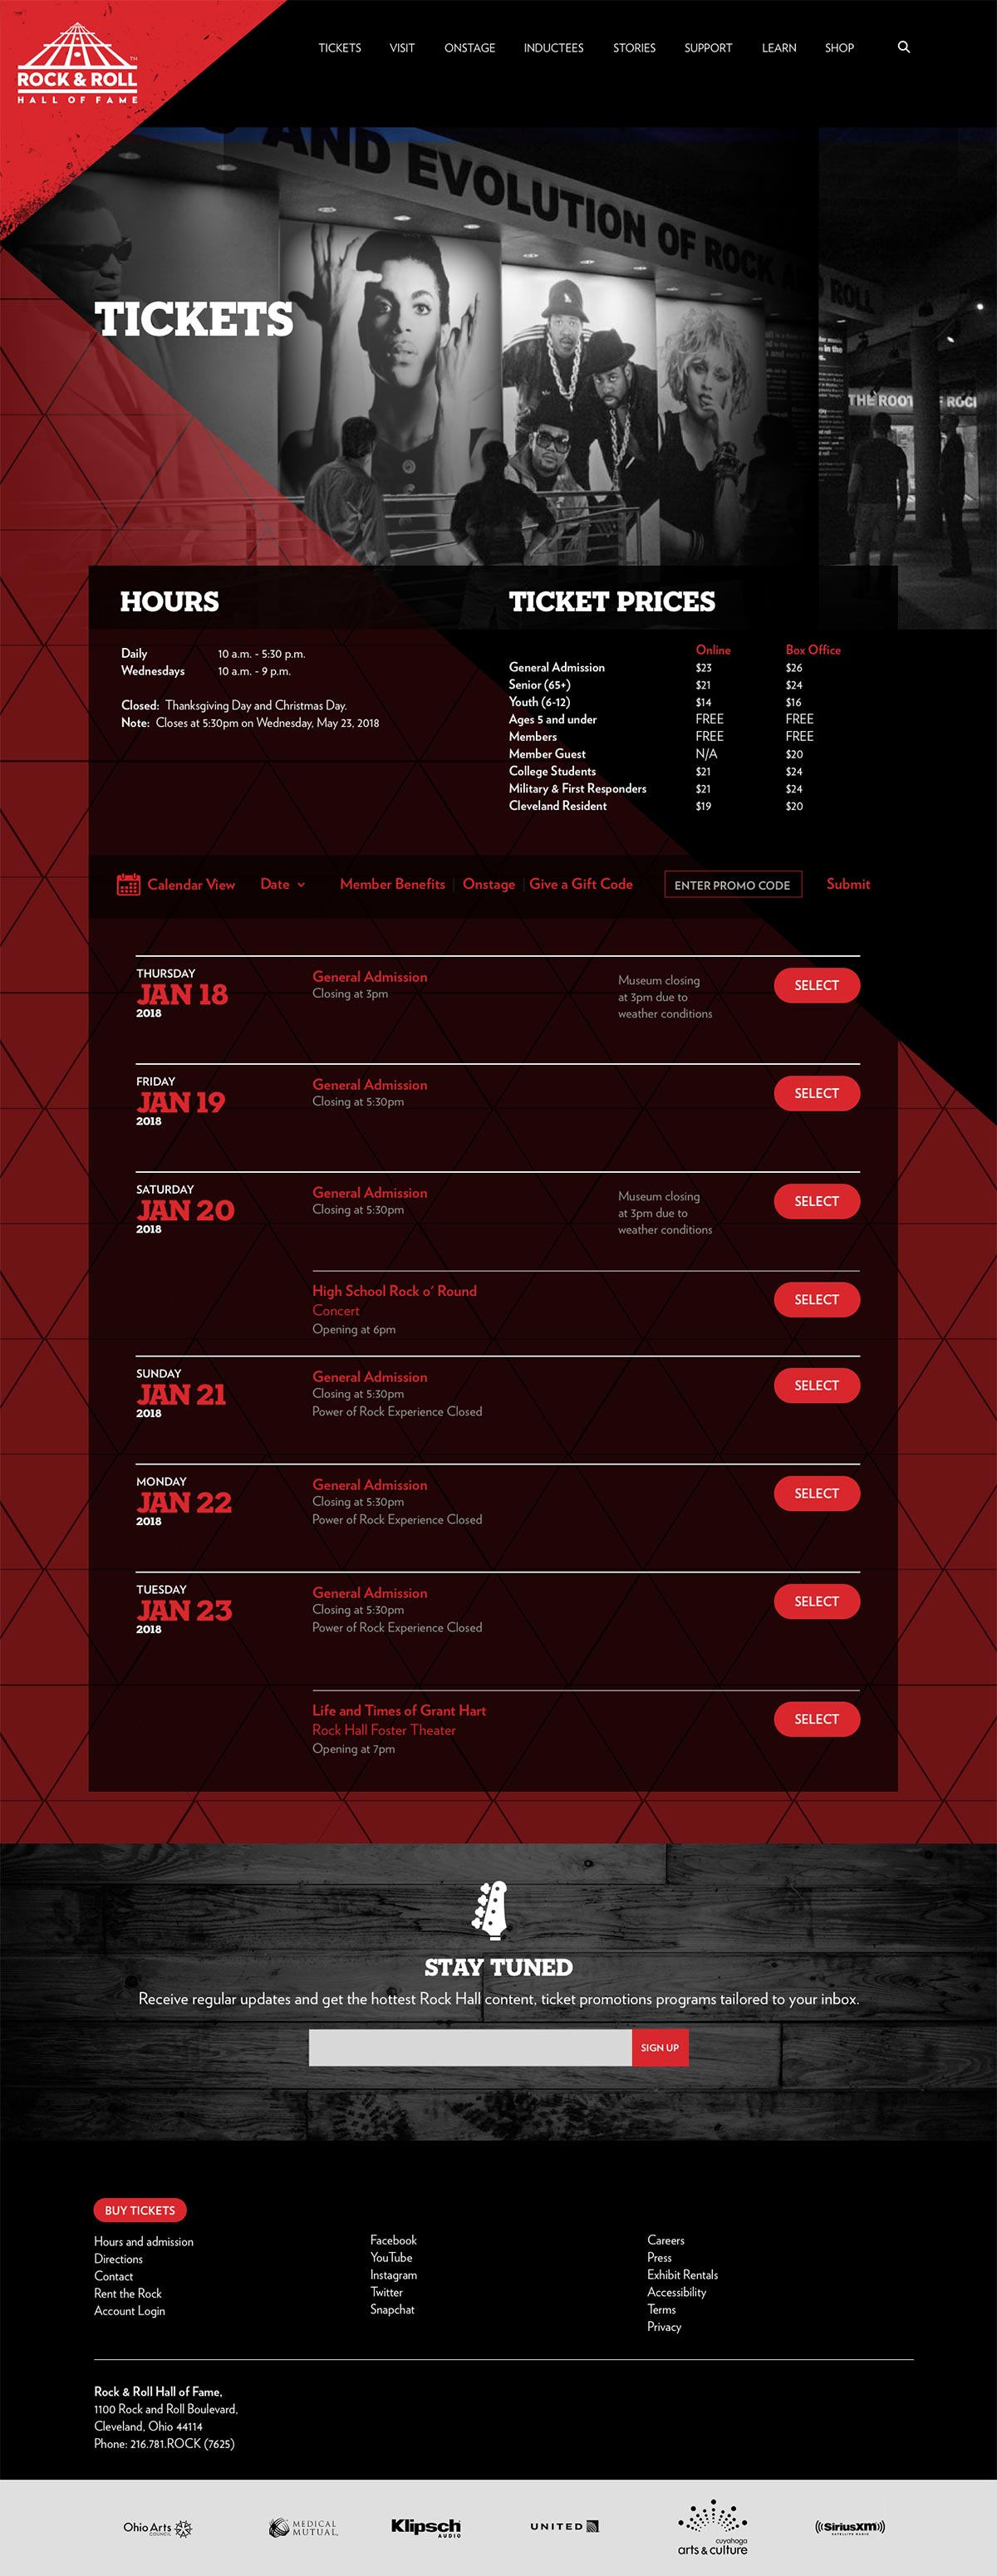 Ticketing page on the Rock and Roll Hall of Fame website.